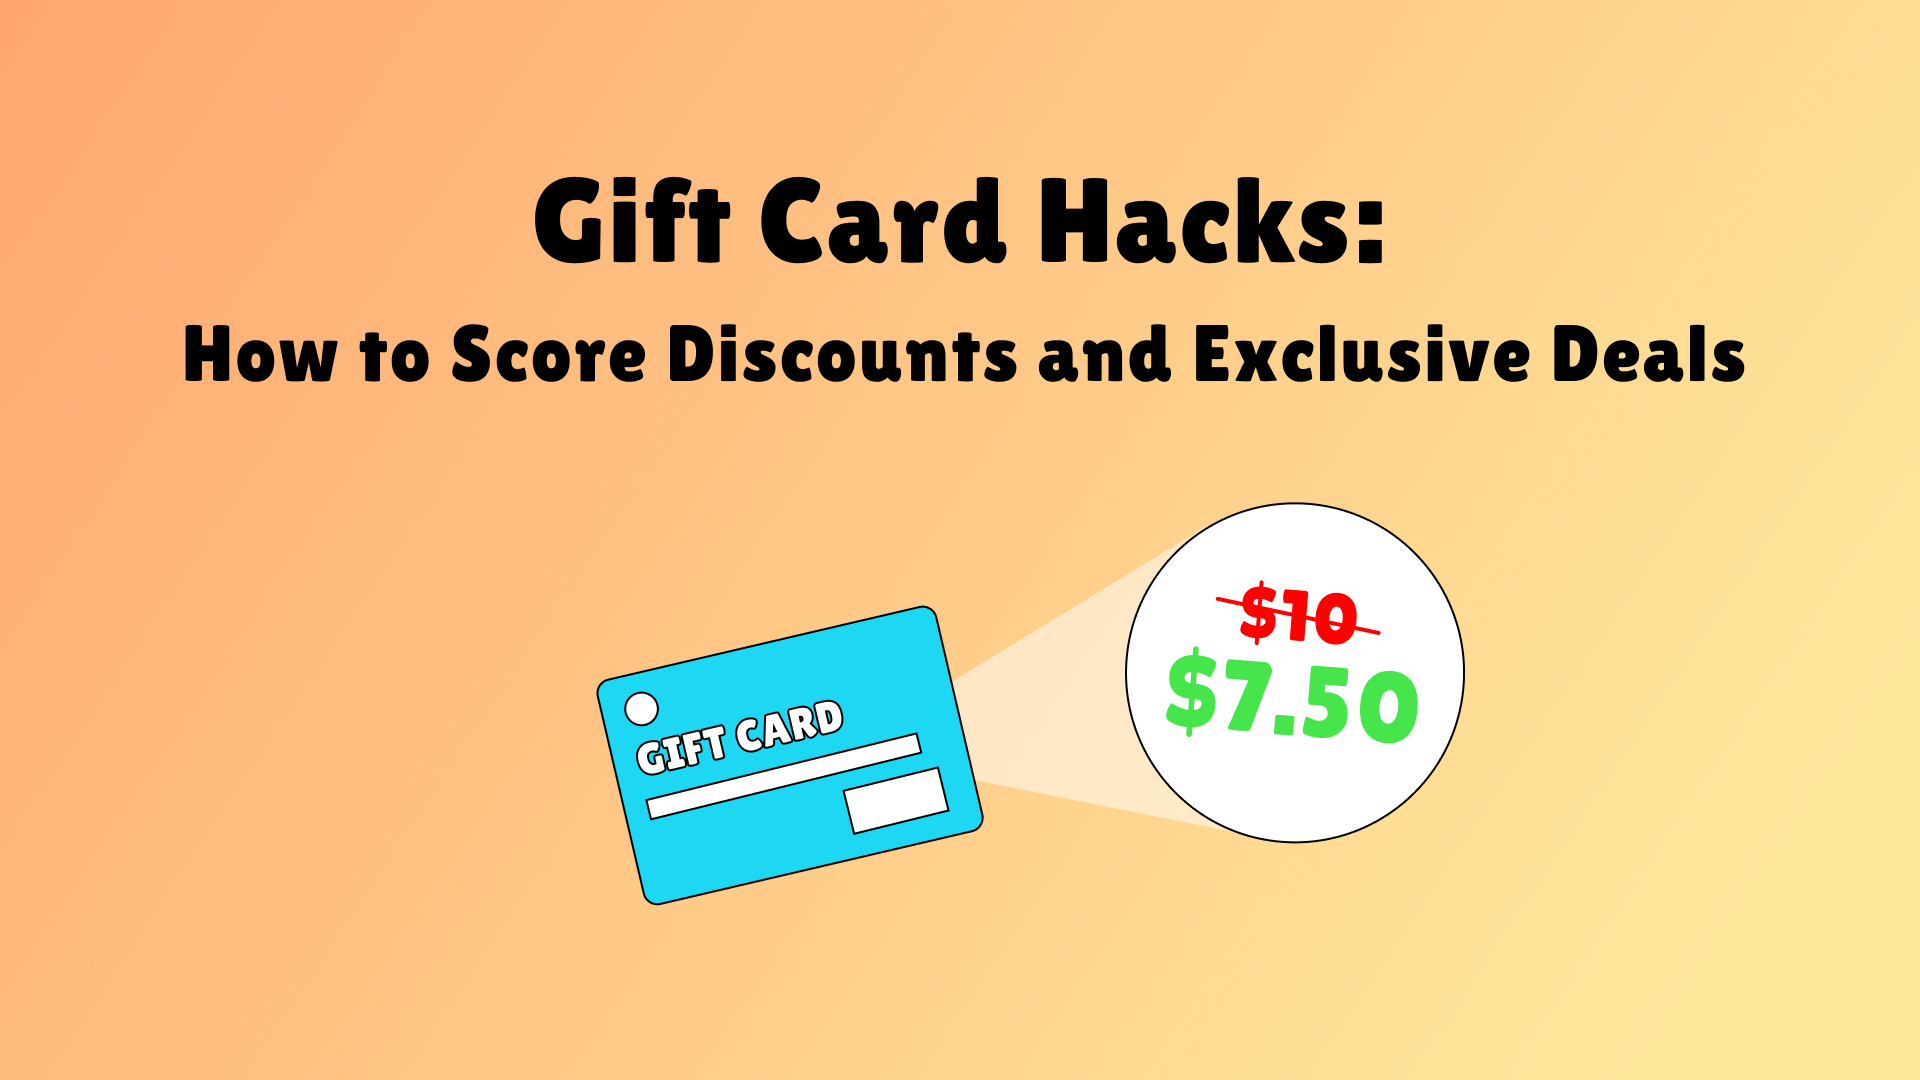 Gift Card Hacks: How to Score Discounts and Exclusive Deals